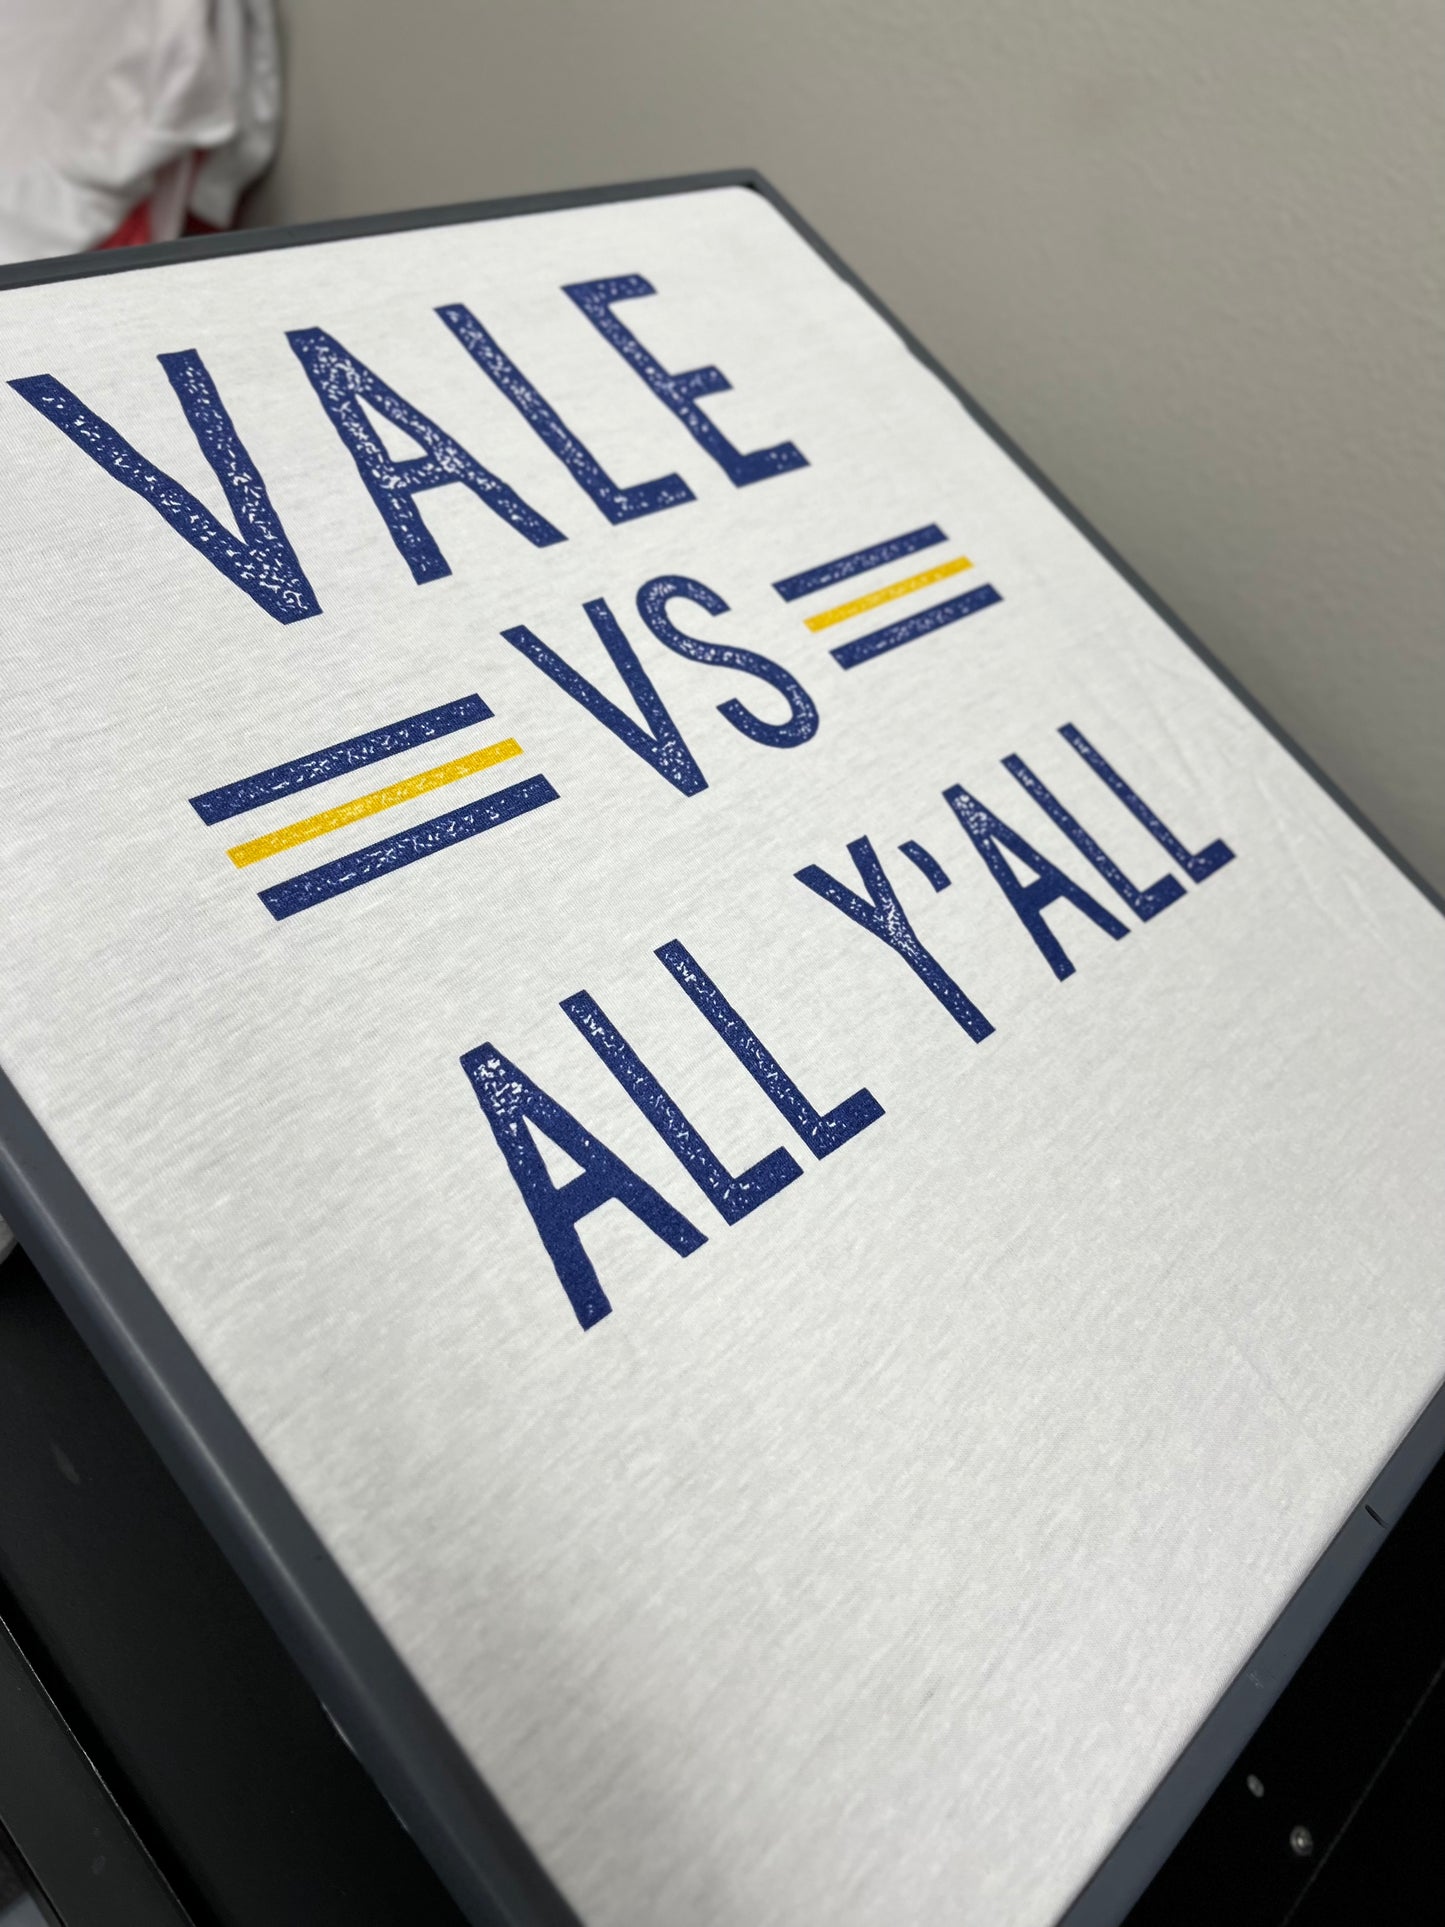 VALE vs All Y’all